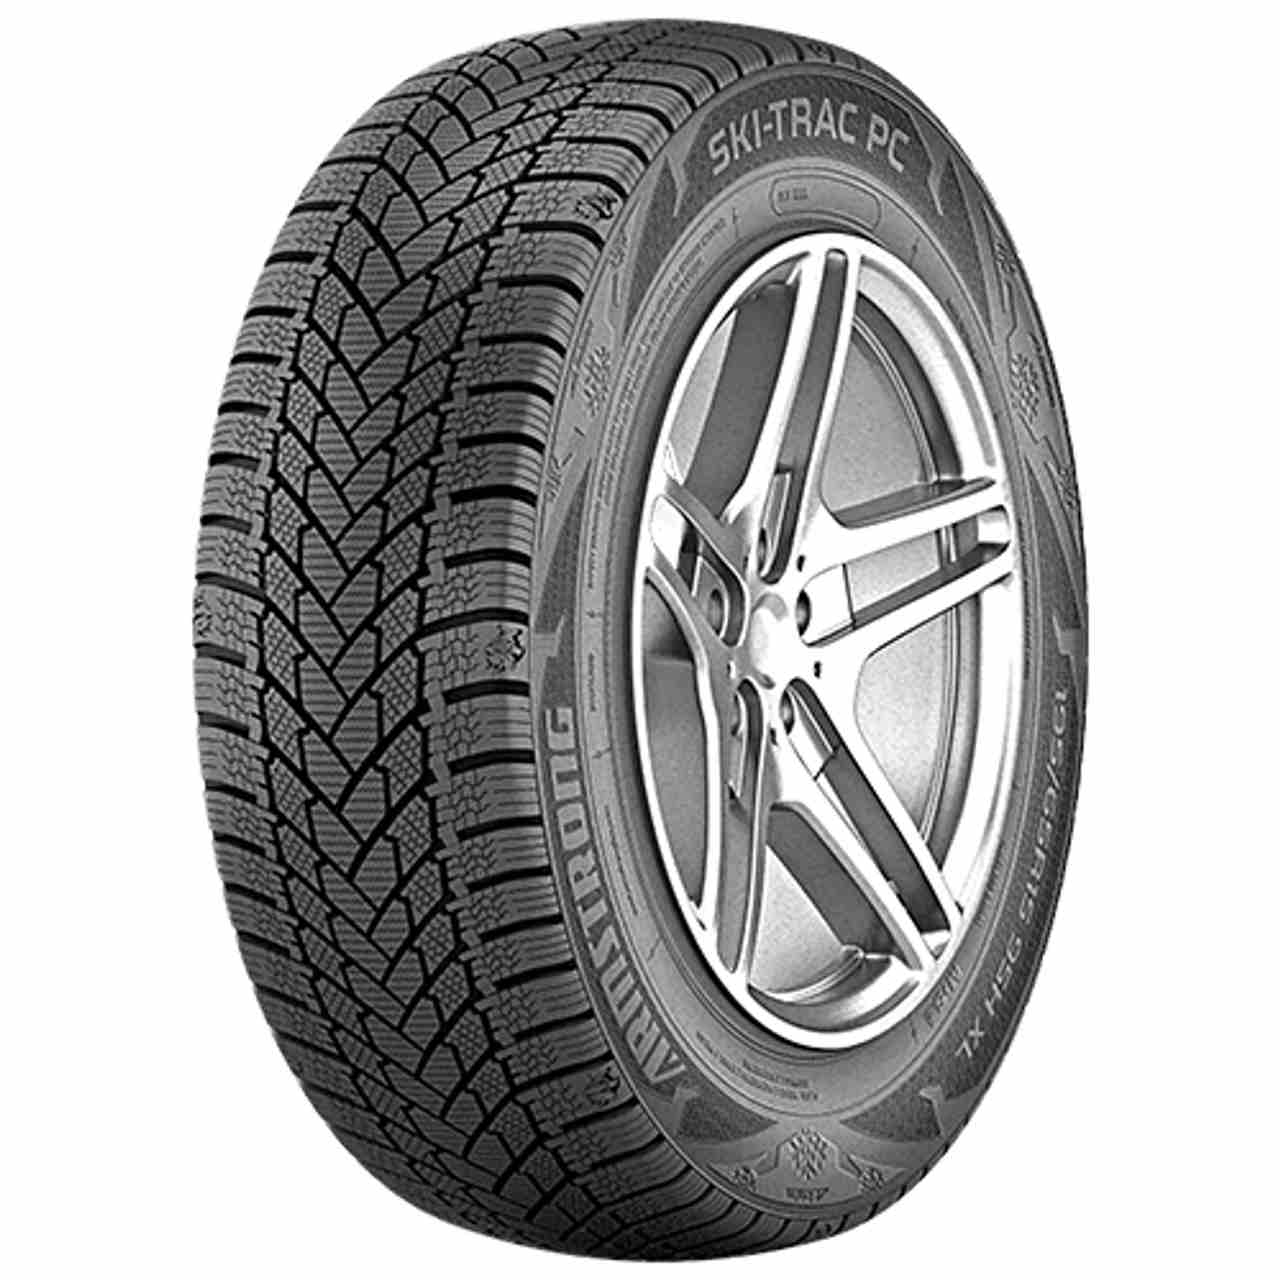 ARMSTRONG SKI-TRAC PC 185/60R14 82T BSW von Armstrong